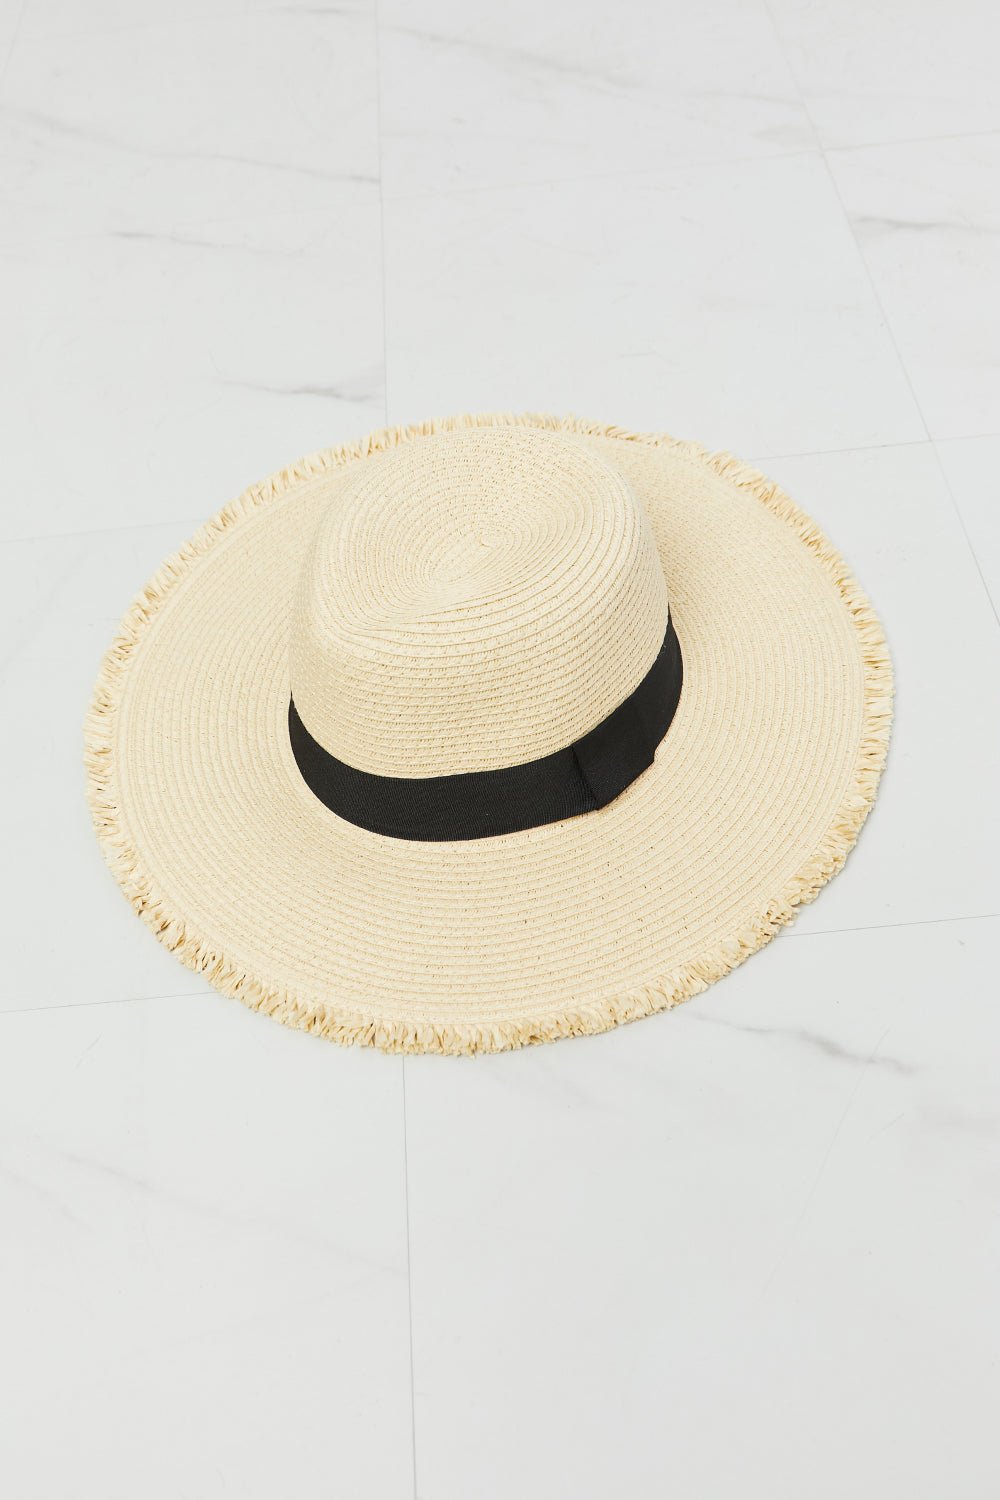 Fame Time For The Sun Straw Hat - Global Village Kailua Boutique